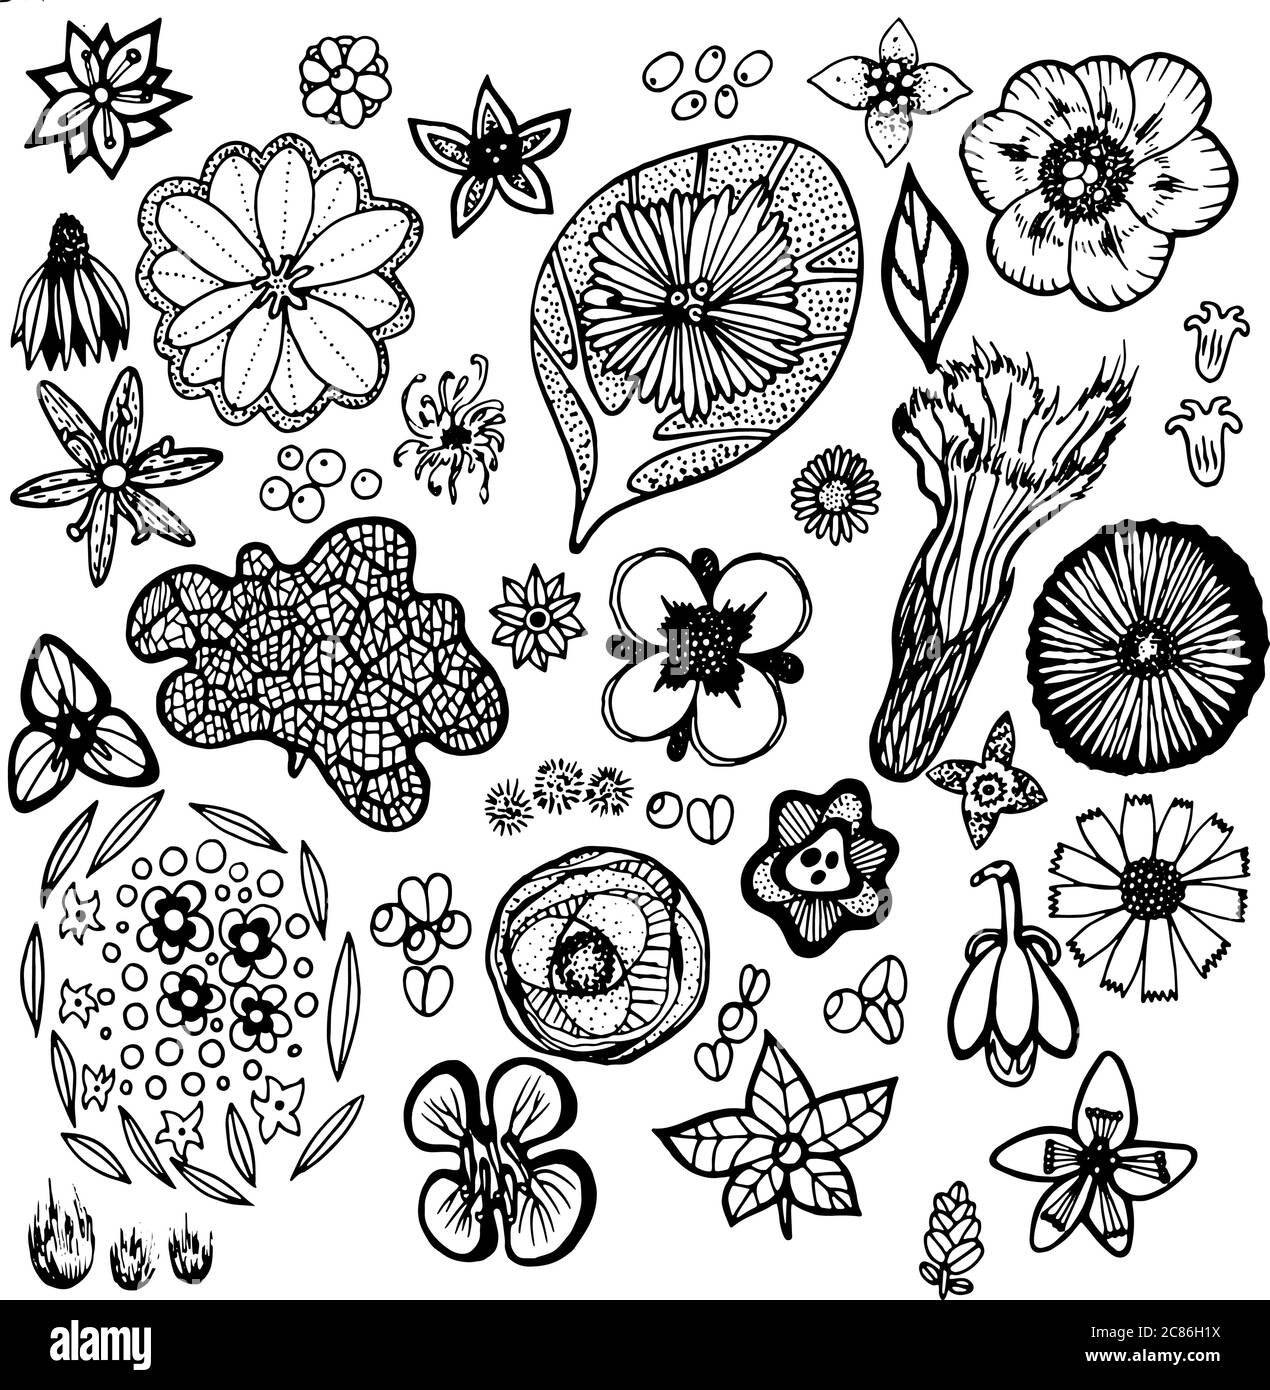 Plant element collection. Details of plants of North America. Hand drawn monochrome elements for design and background. Stock Vector